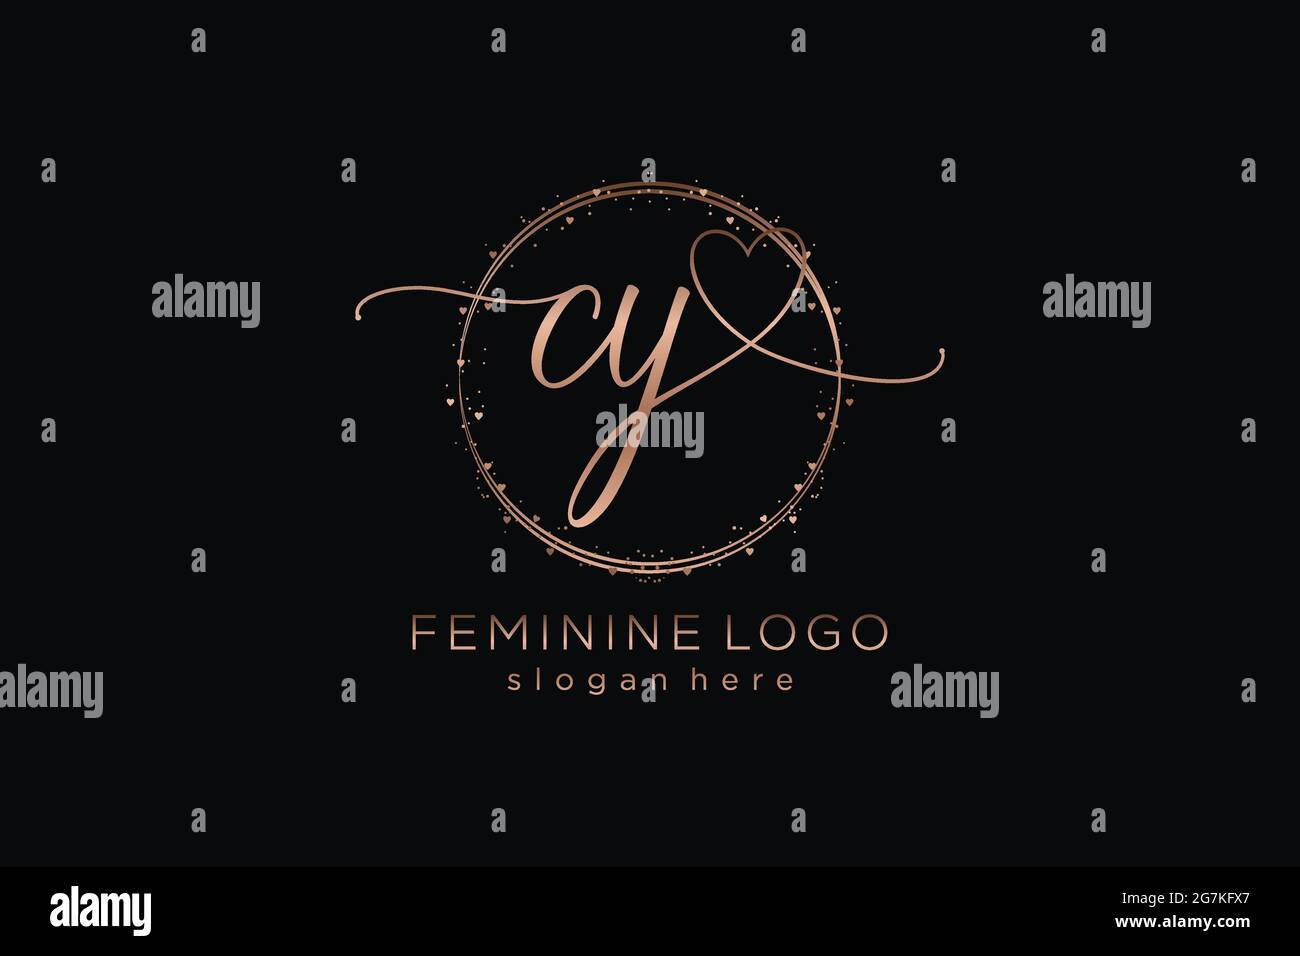 CY handwriting logo with circle template vector logo of initial wedding, fashion, floral and botanical with creative template. Stock Vector